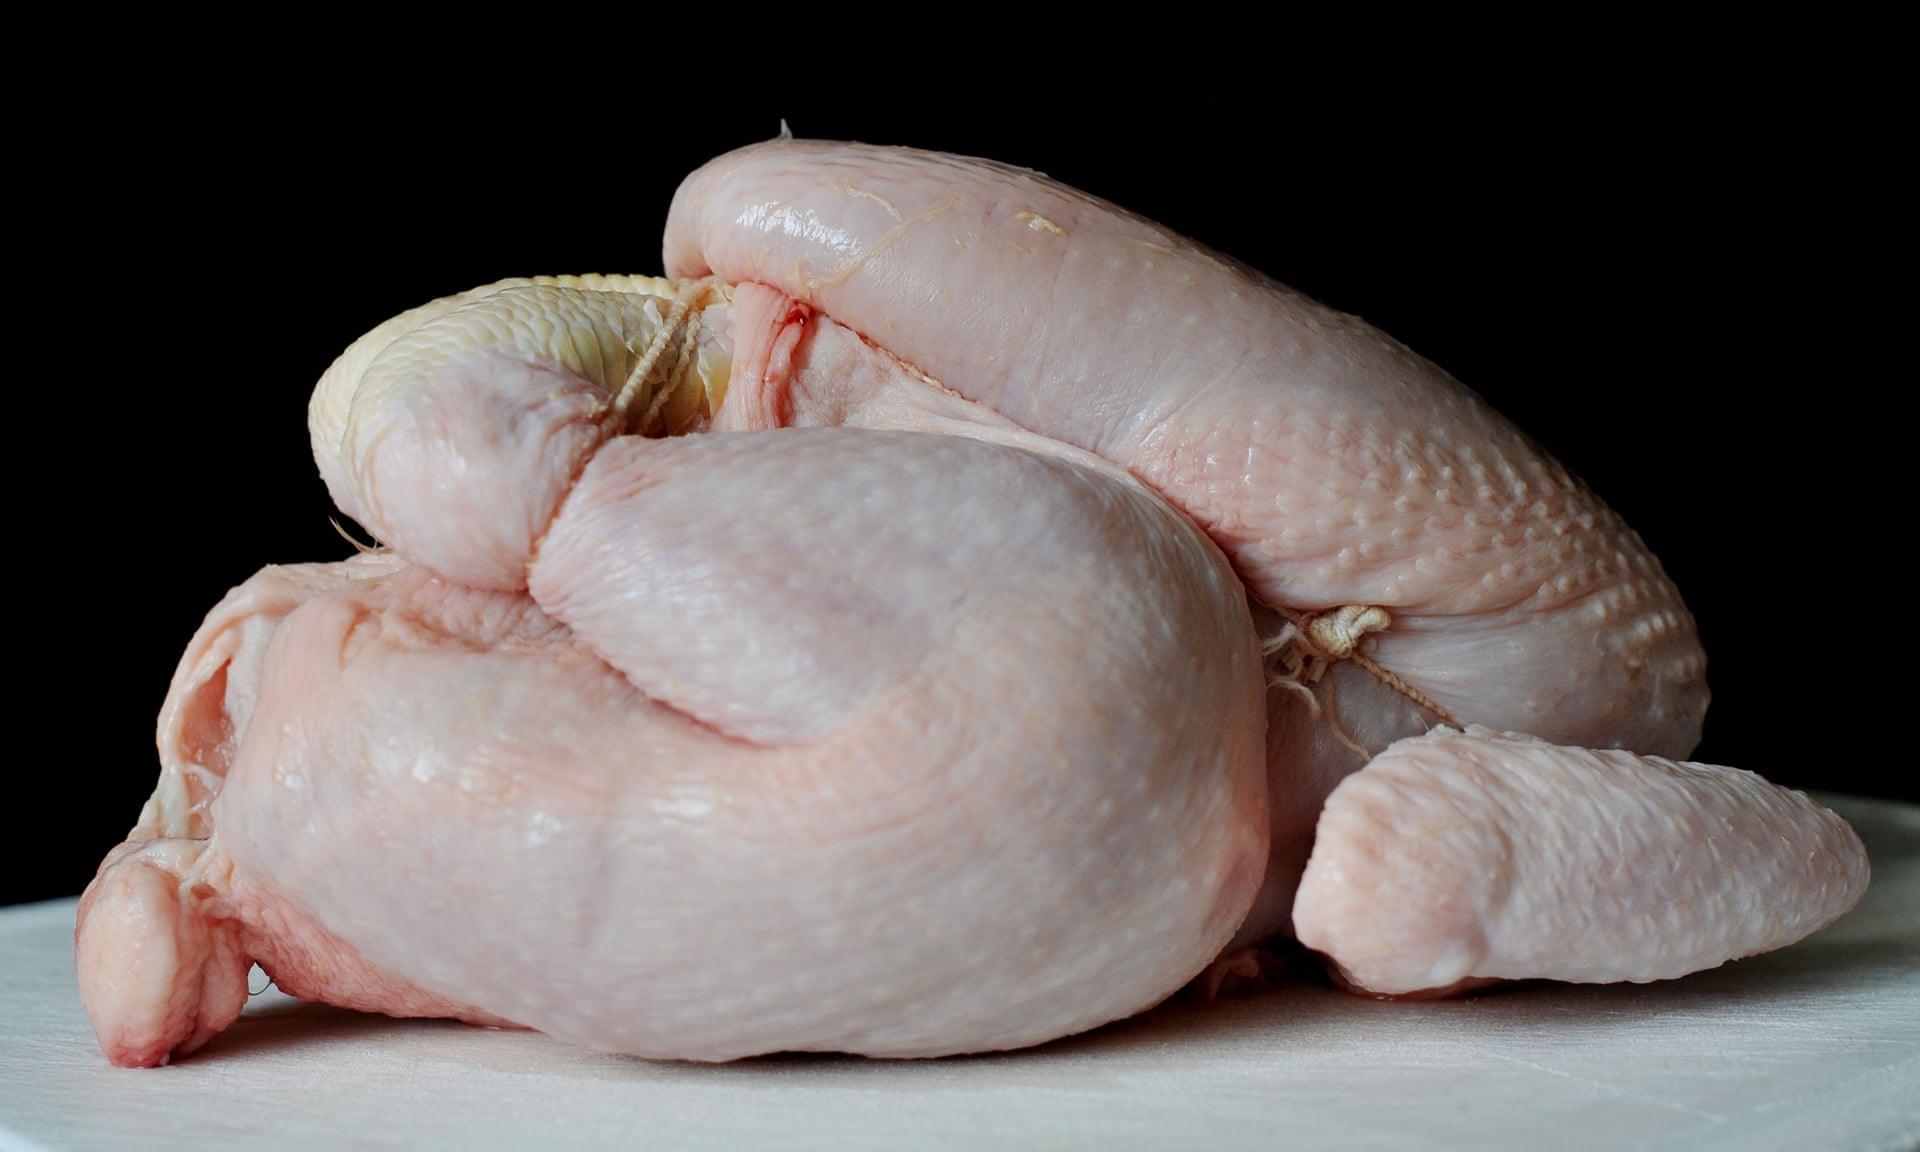 American Chicken Meat Is Filled with Chlorine that is extremely